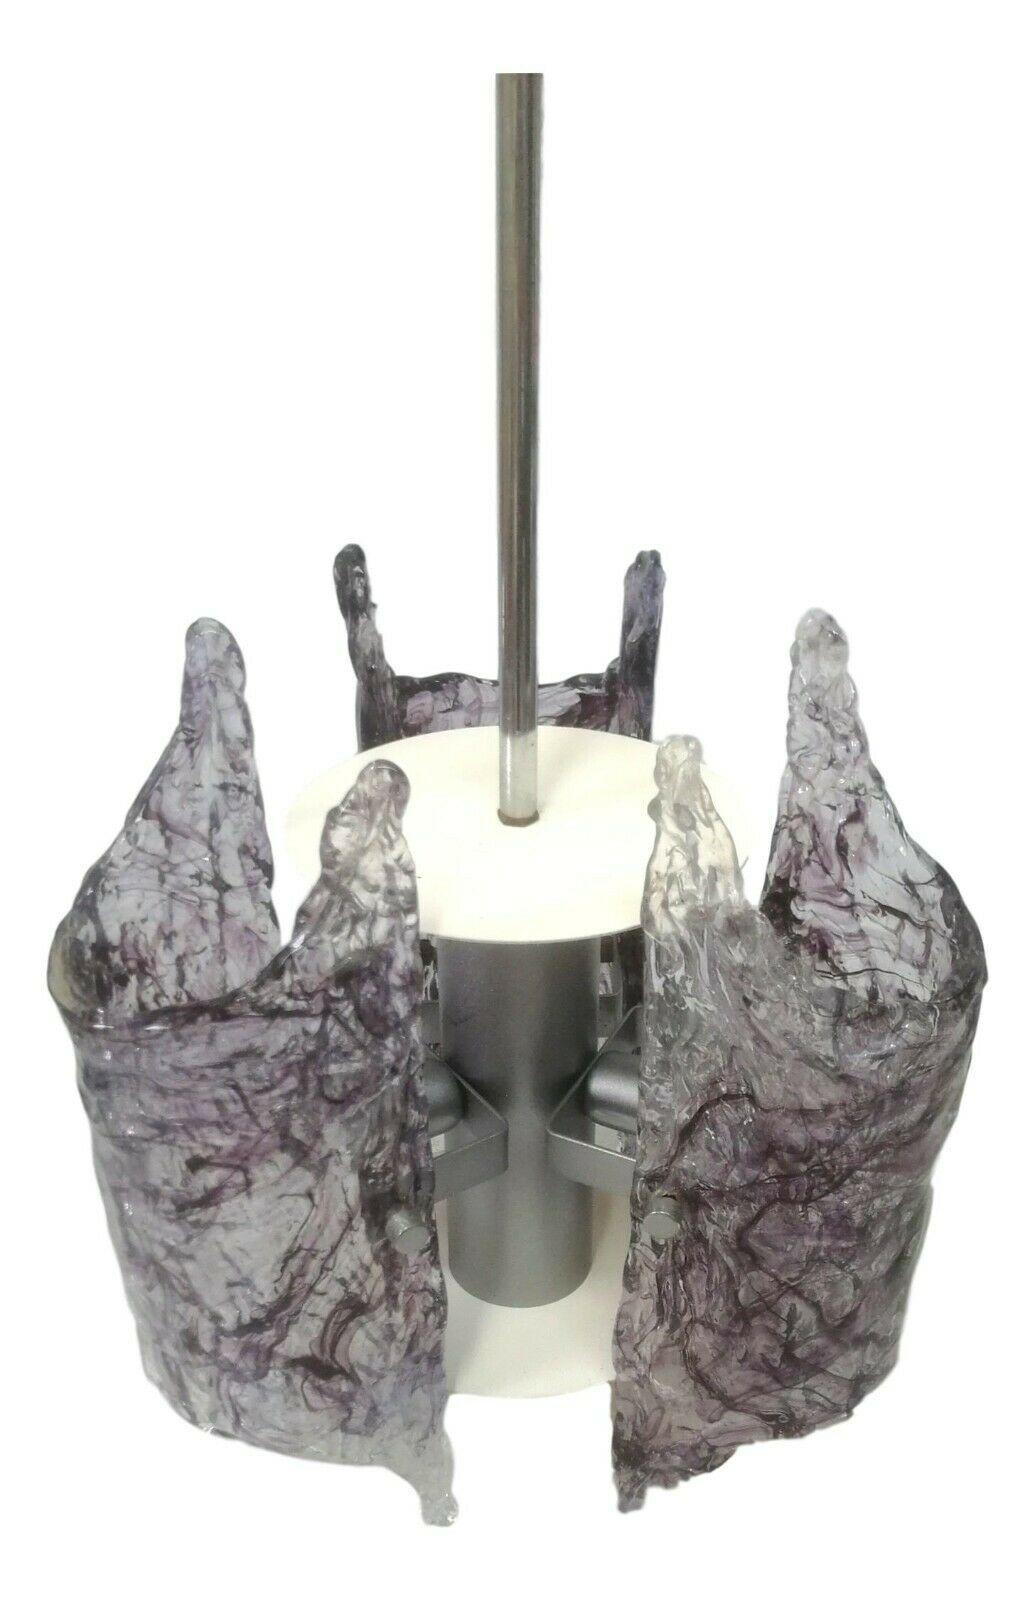 70s chandelier, jt kalmar production, made with a steel and metal structure and three murano glass diffusers, in shades of purple

The height measurement is variable as the central axis can be adjusted according to need, so it can even go beyond